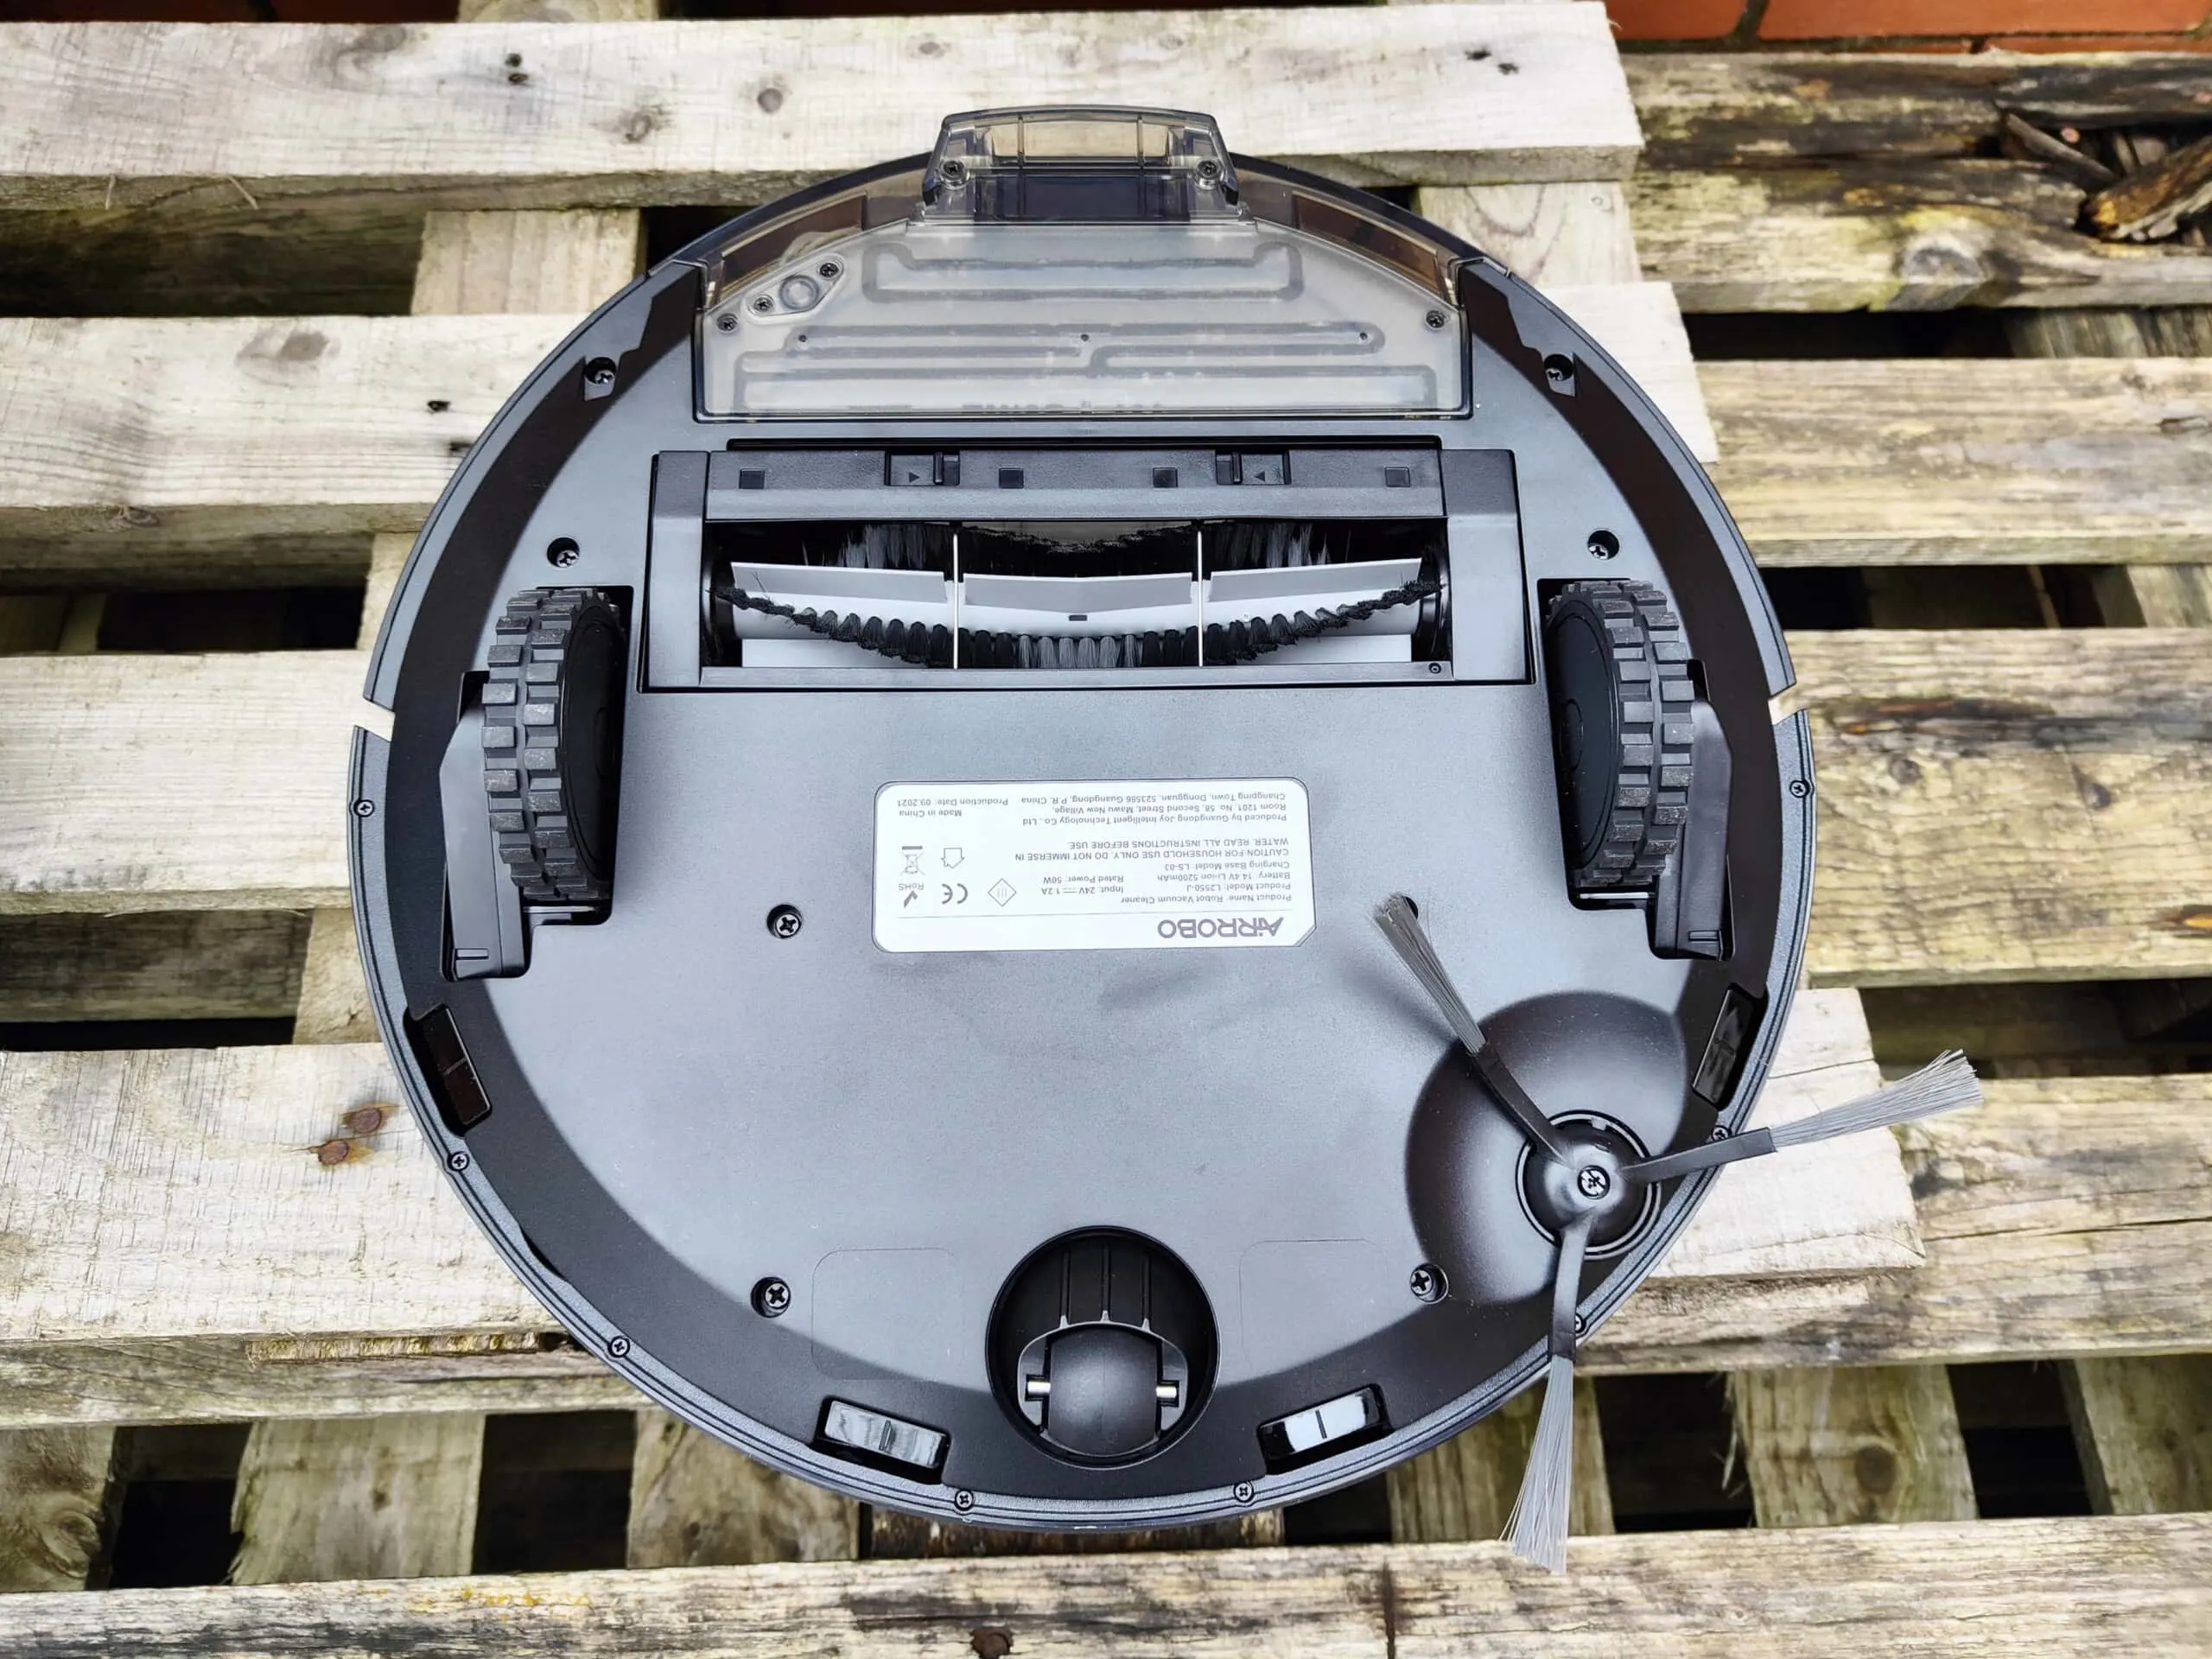 AIRROBO T10 plus self empty review4 scaled - AIRROBO T10+ Self-Empty Robot Vacuum & Mop Review - The cheapest self-emptying smart mapping vacuum on Amazon